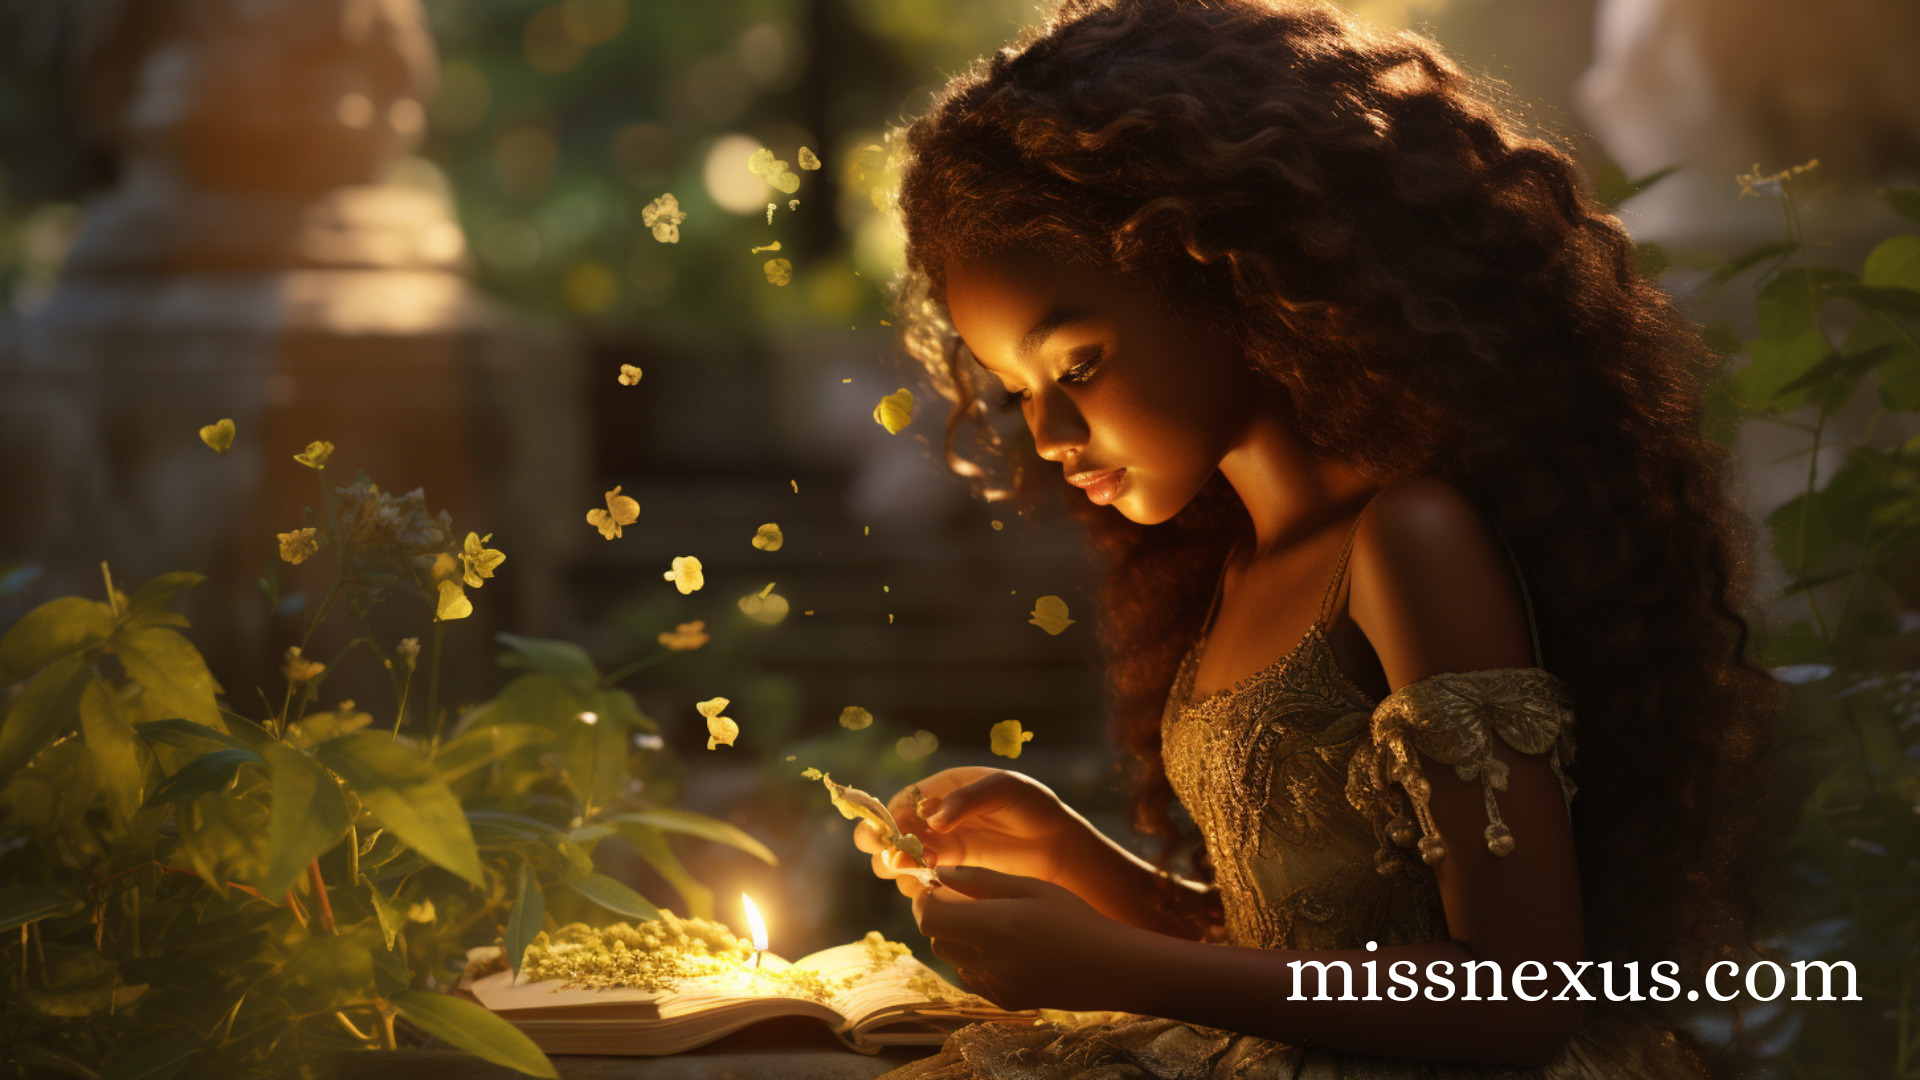 In the dappled sunlight of an enchanting garden, a young Black girl sits upon a moss-covered stone anticipating what lies ahead in her quest. The golden hues of late afternoon cascade over her, casting a warm, ethereal glow that dances upon her cocoa-kissed skin.